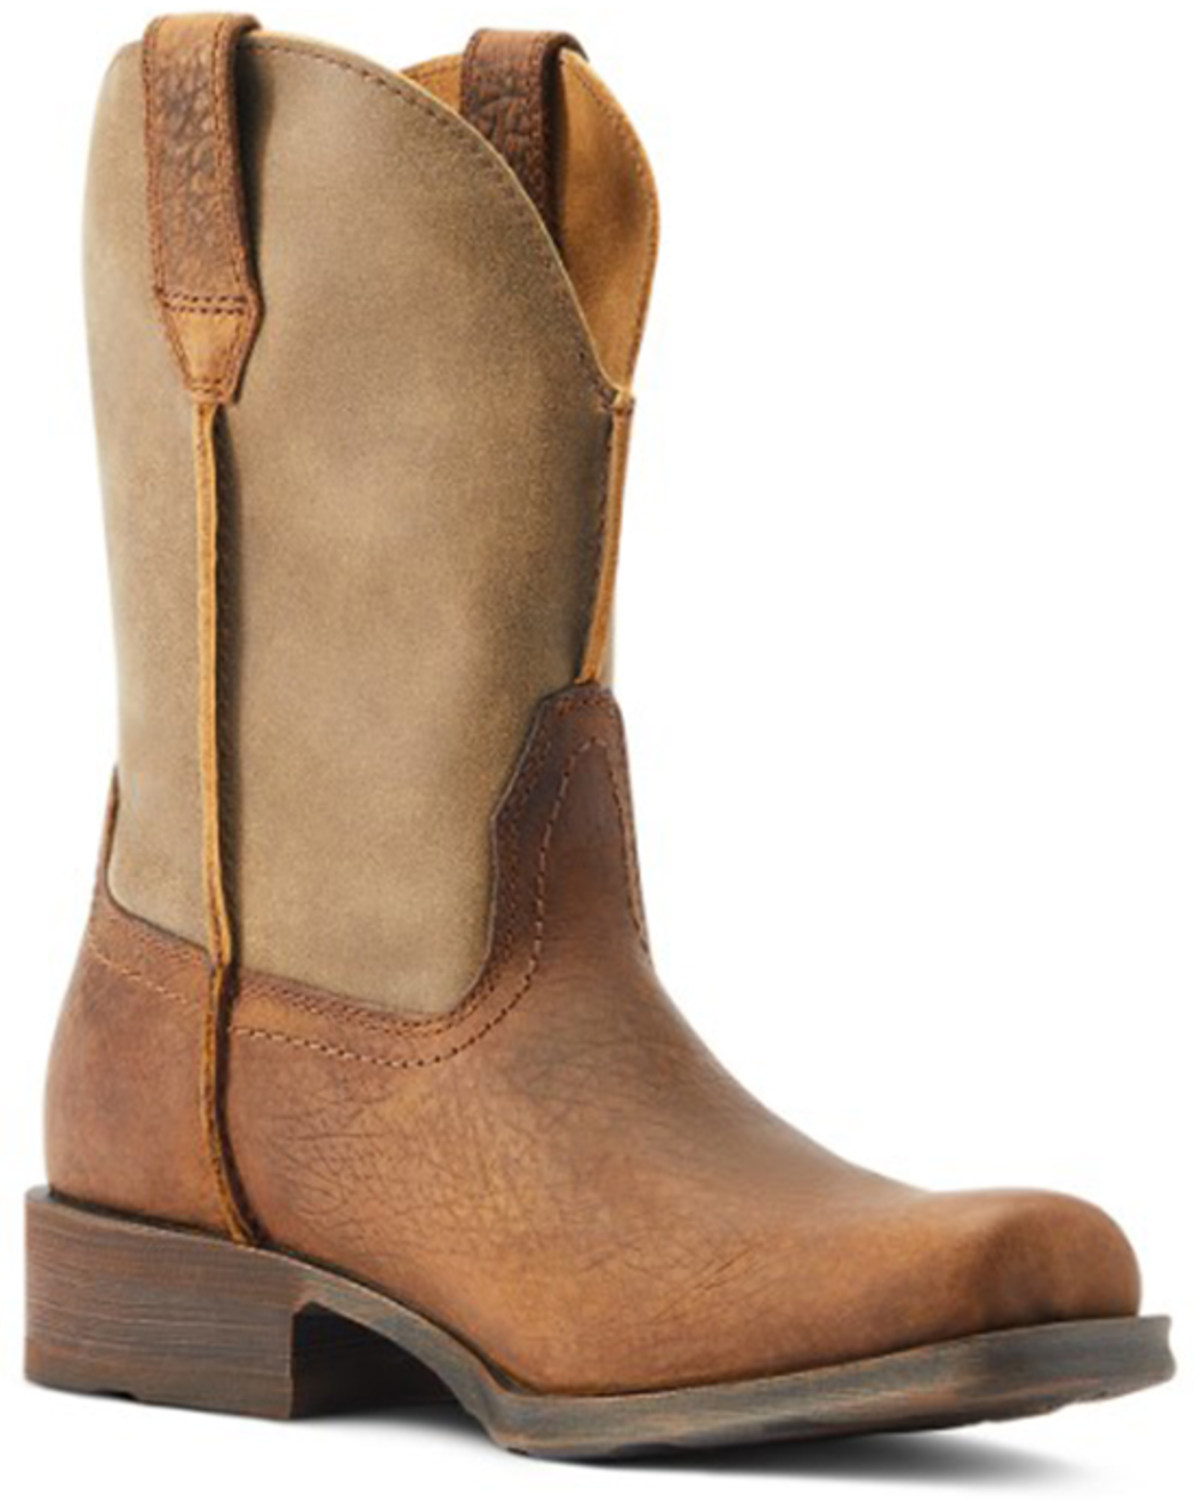 Ariat Women's Bomber Rancher Western Boots - Square Toe